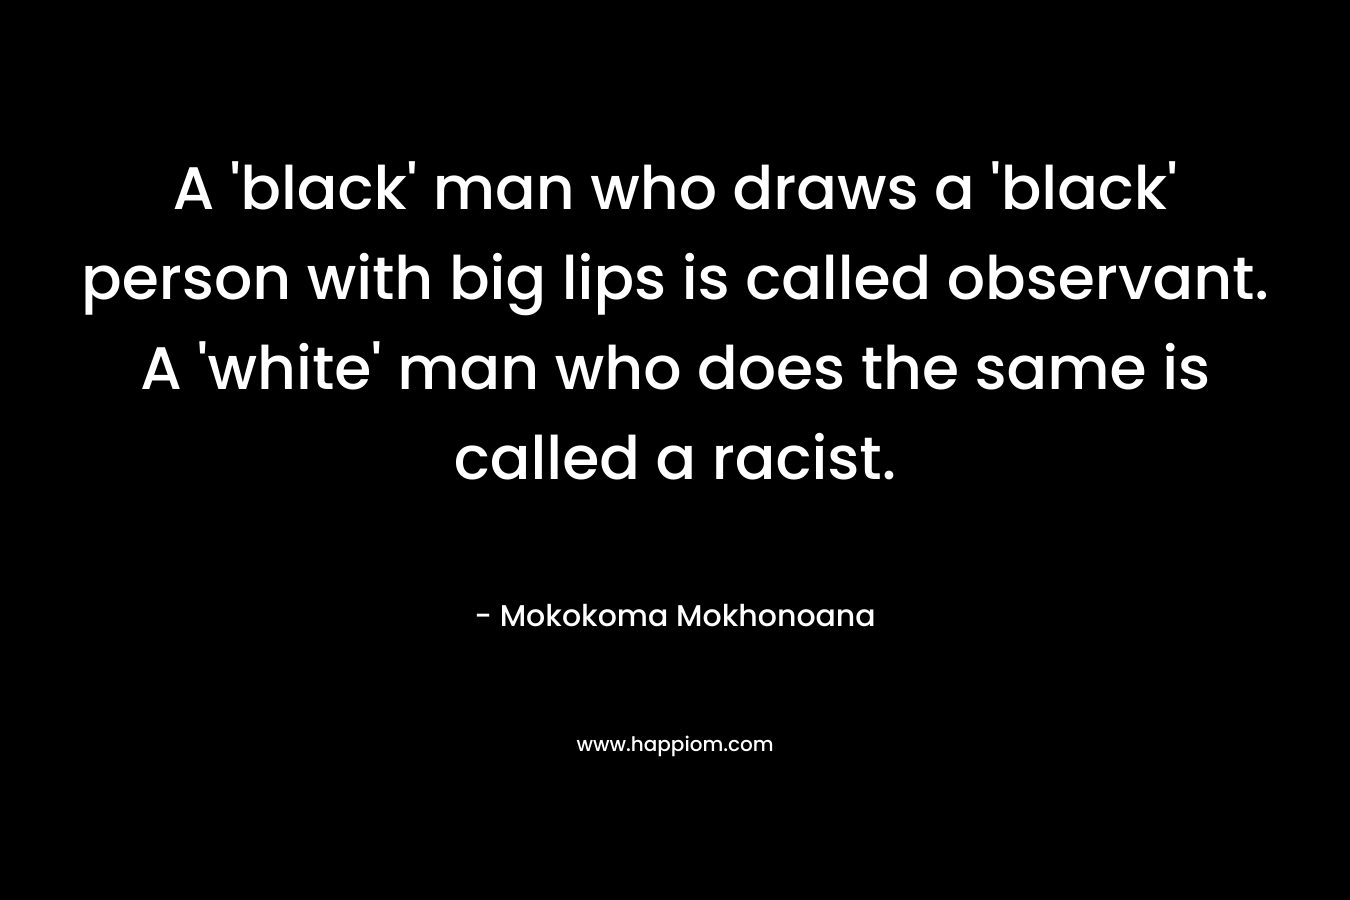 A ‘black’ man who draws a ‘black’ person with big lips is called observant. A ‘white’ man who does the same is called a racist. – Mokokoma Mokhonoana